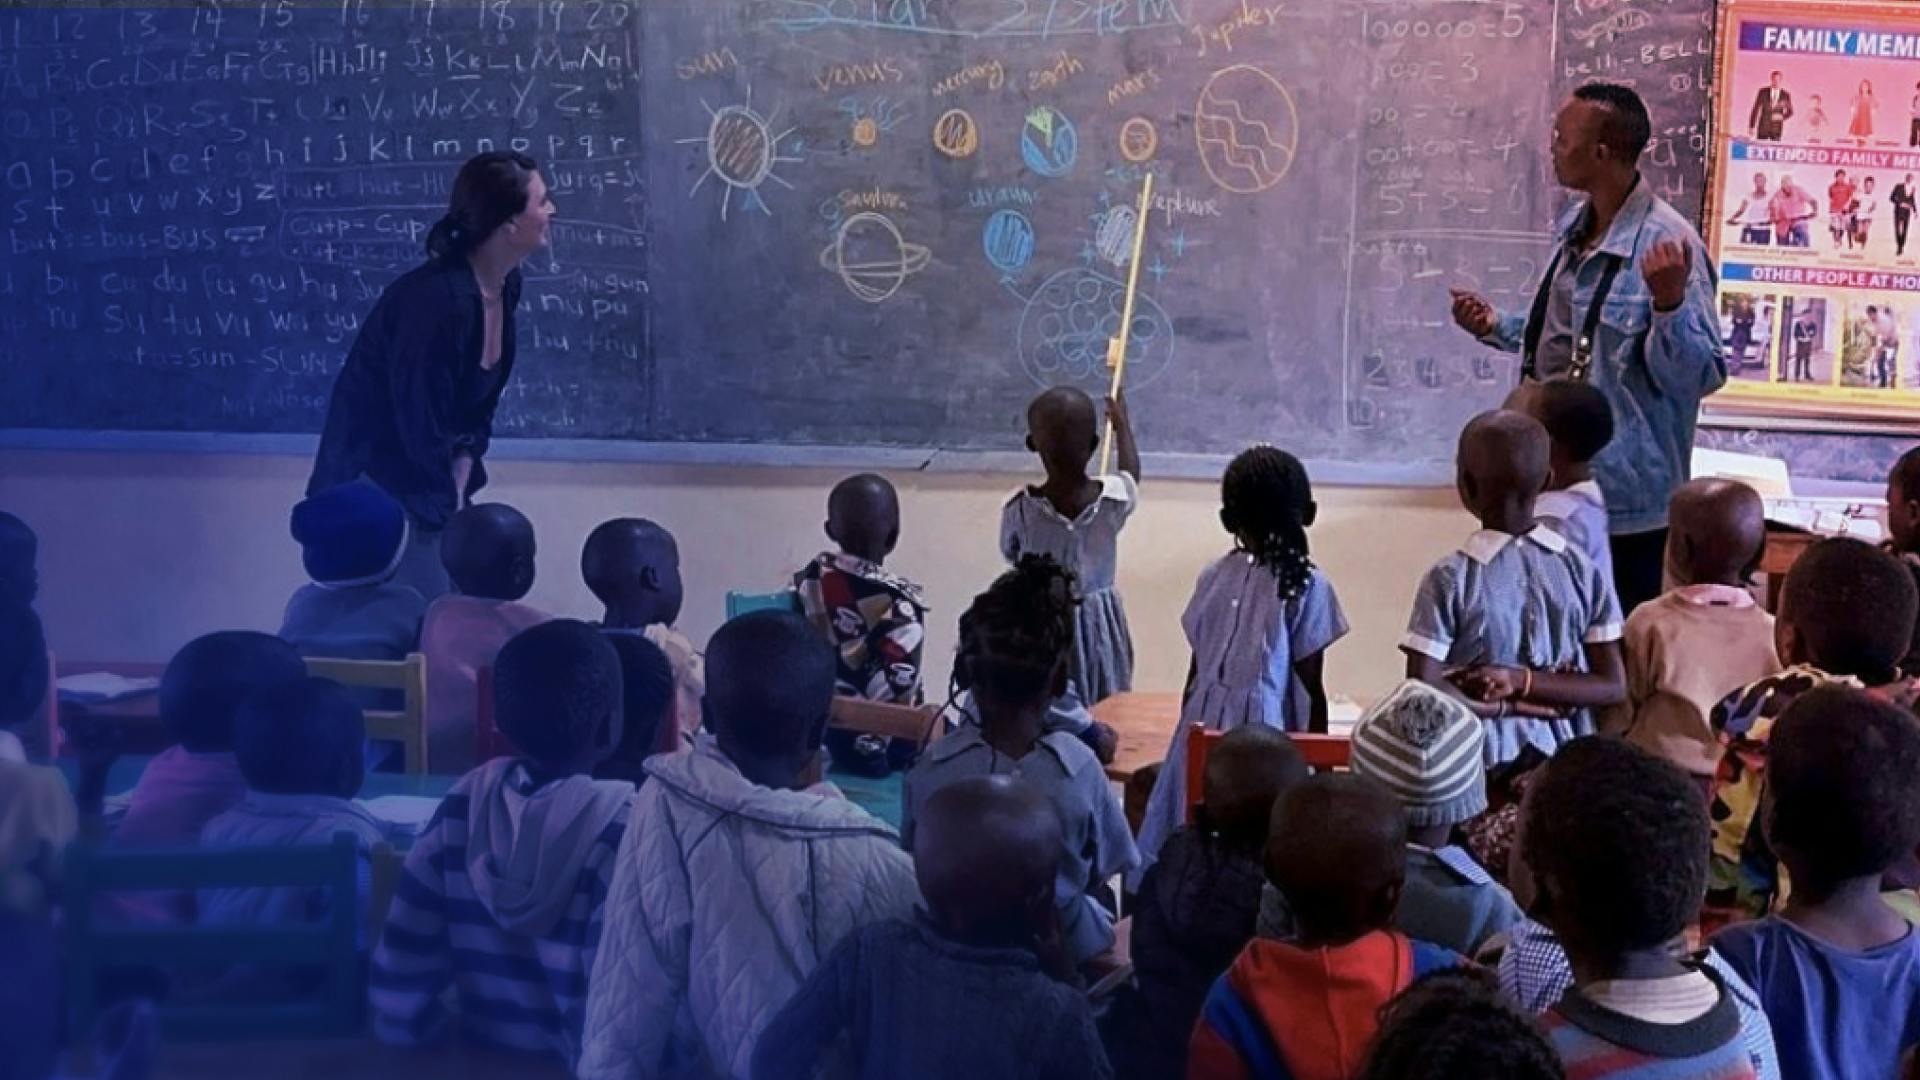 Students in a classroom in Africa are looking to the front of the room where the solar system is drawn on a chalkboard